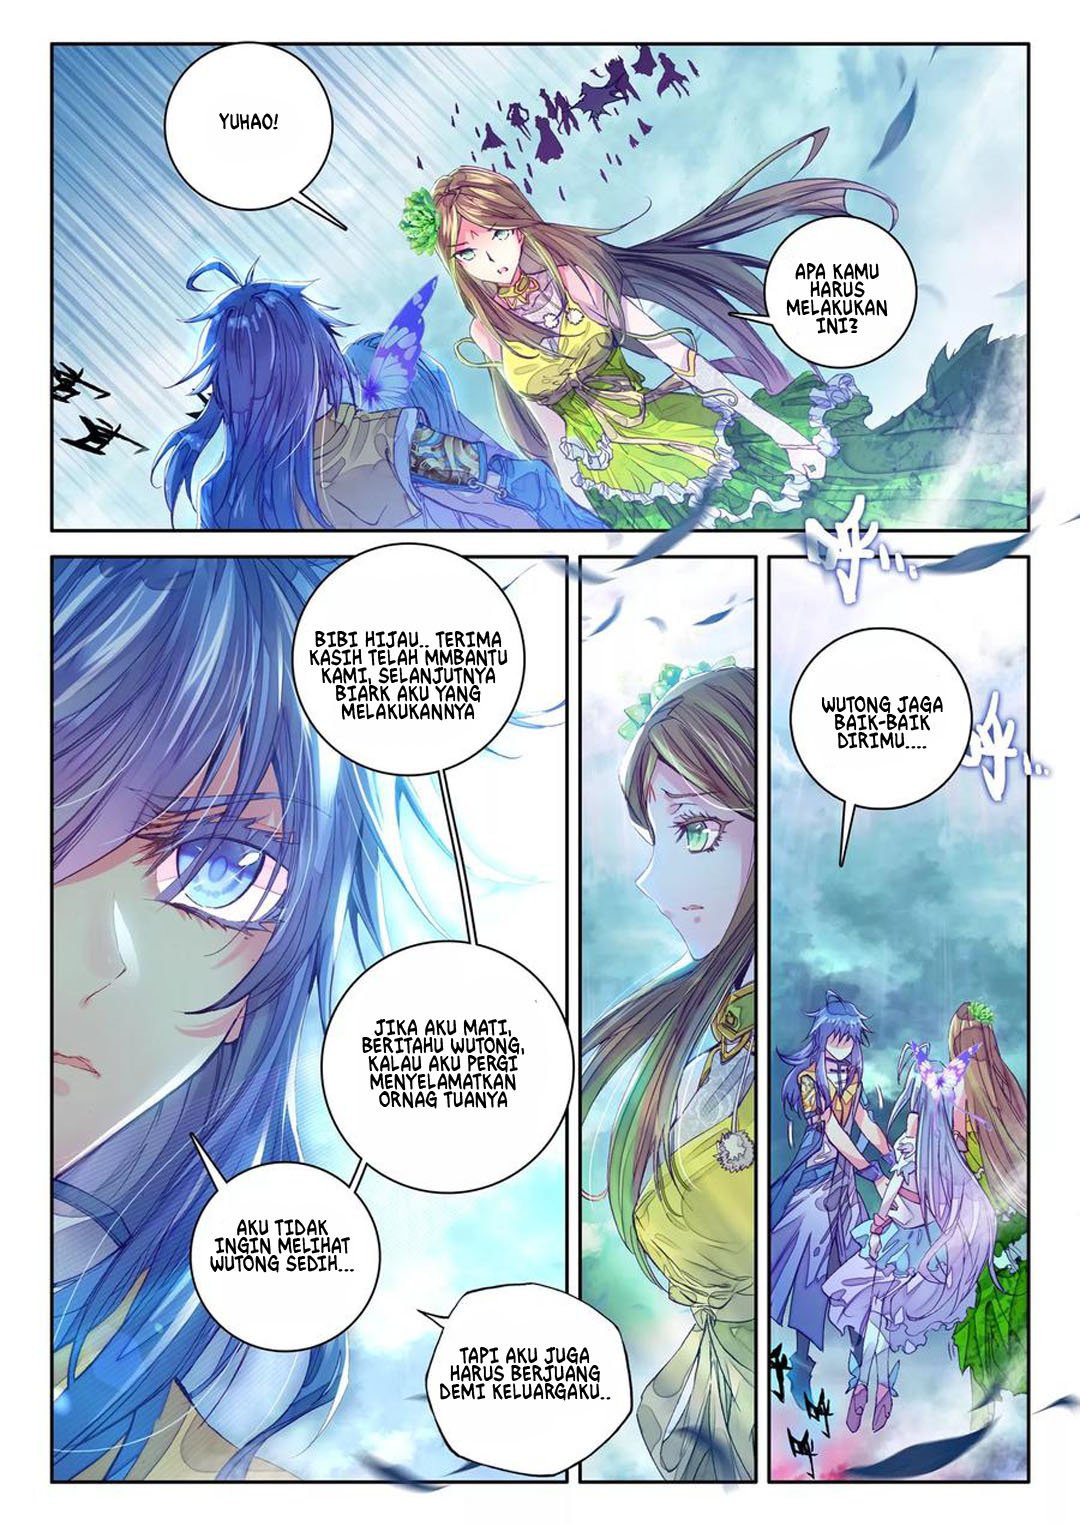 Soul Land – Legend of The Gods’ Realm Chapter 42.2